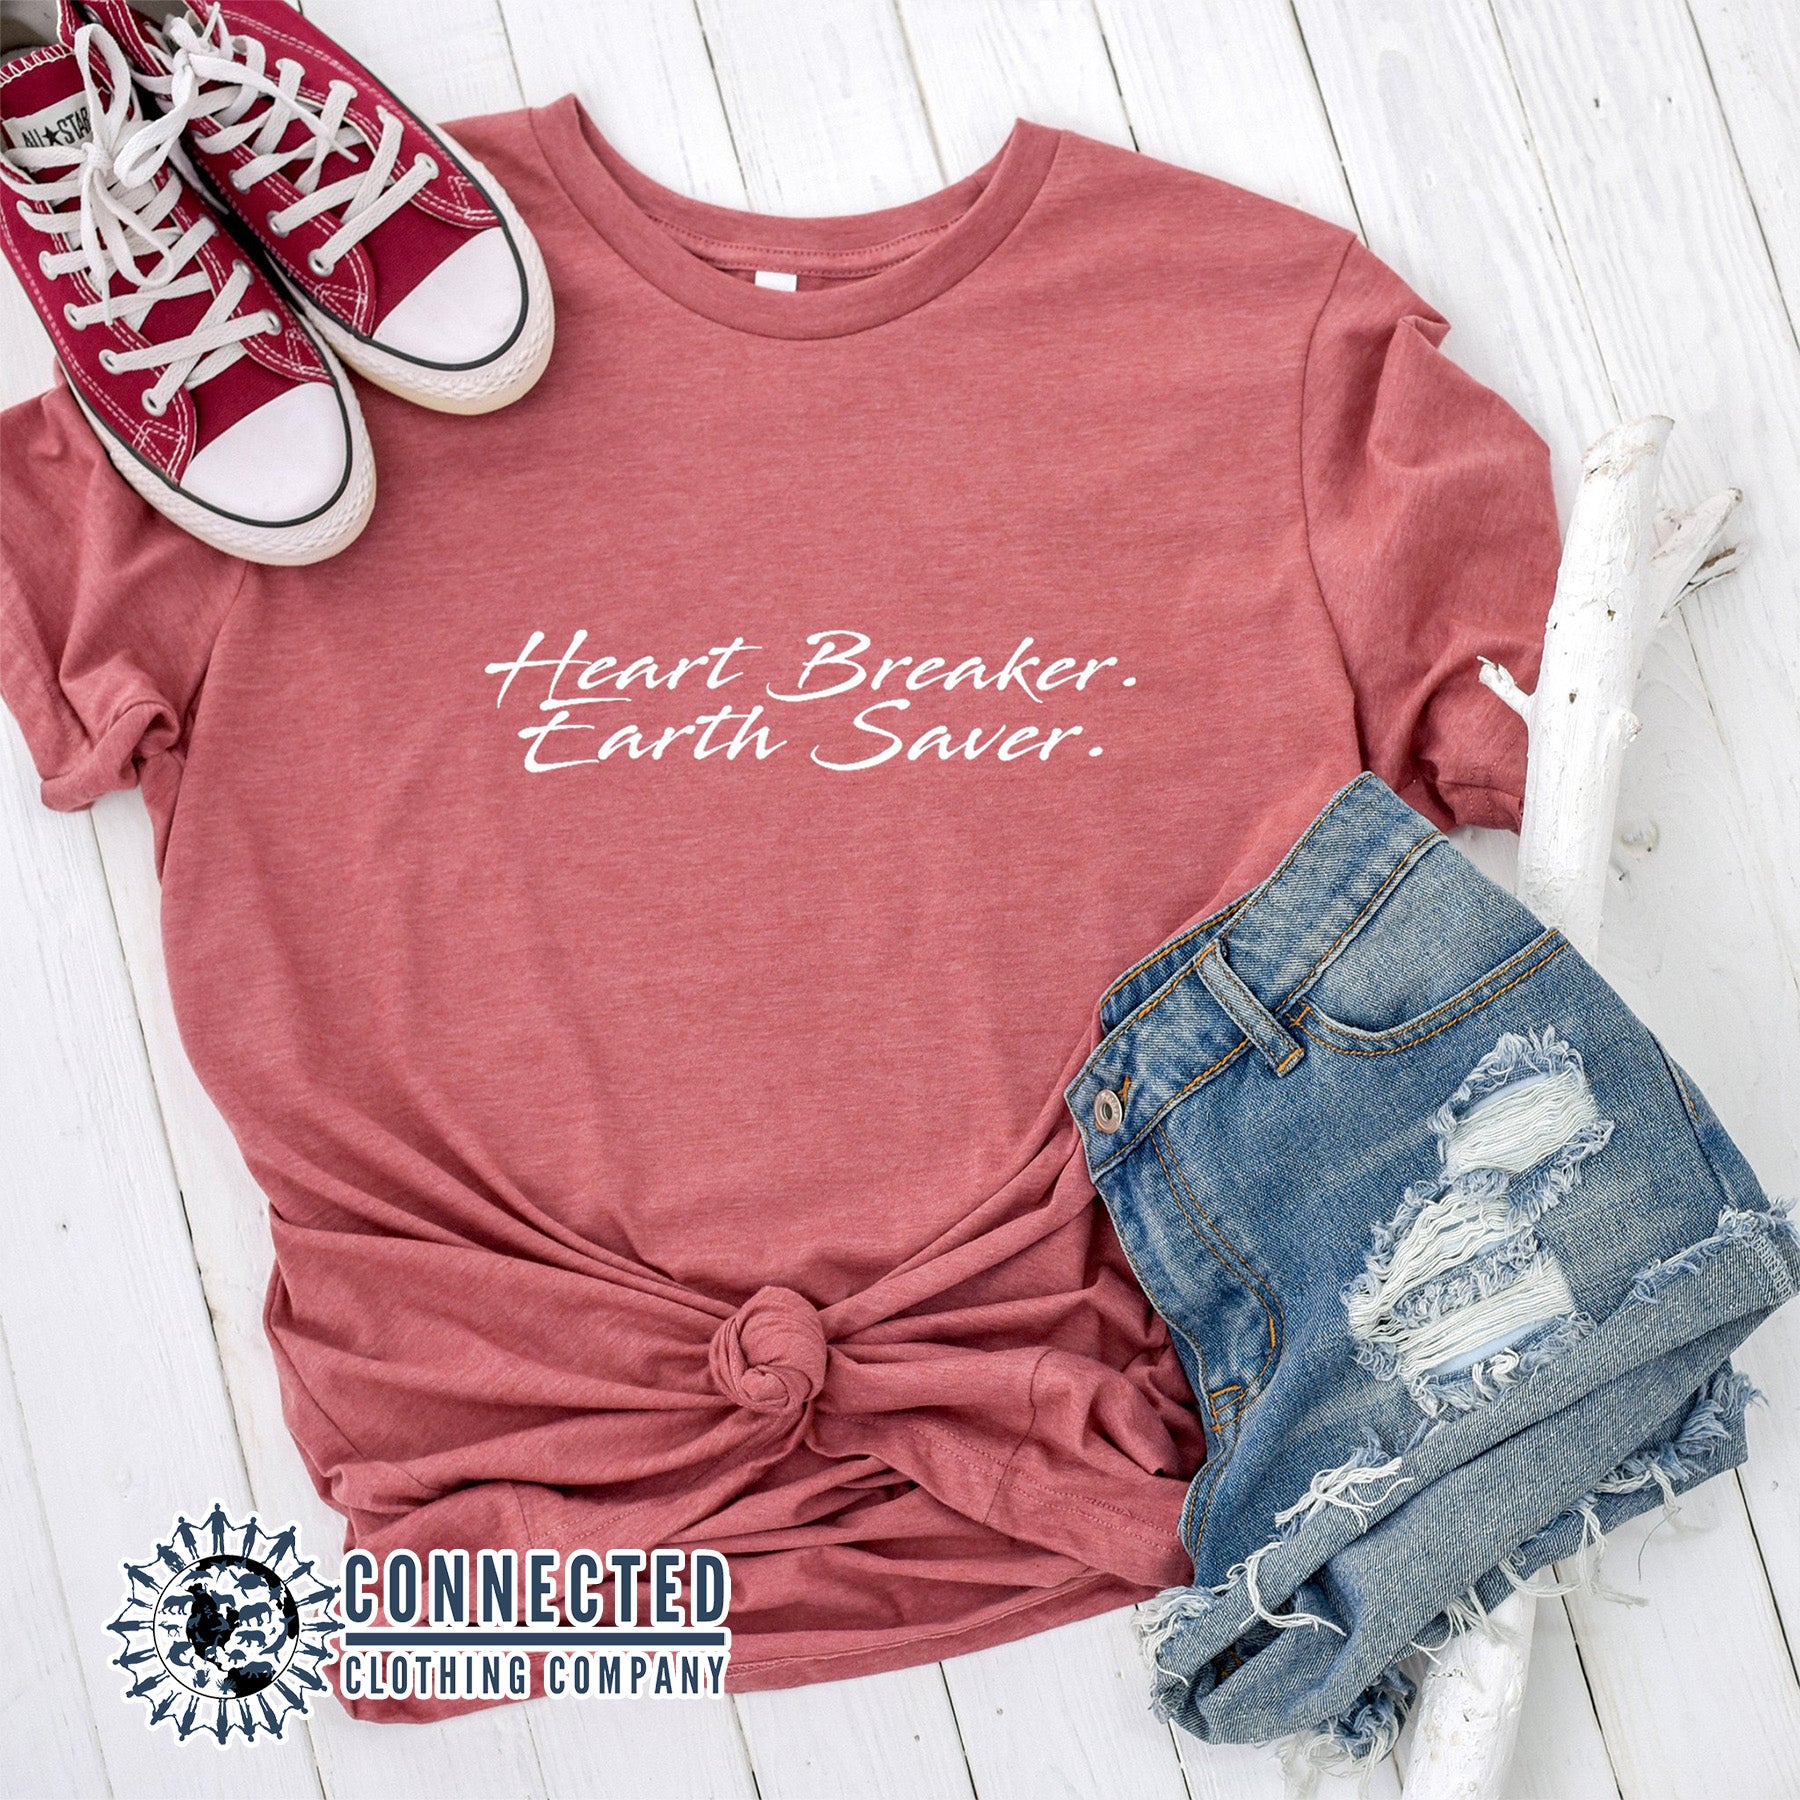 Mauve Heart Breaker. Earth Saver. Short-Sleeve Tee - Connected Clothing Company - Ethically and Sustainably Made - 10% of profits donated to ocean conservation